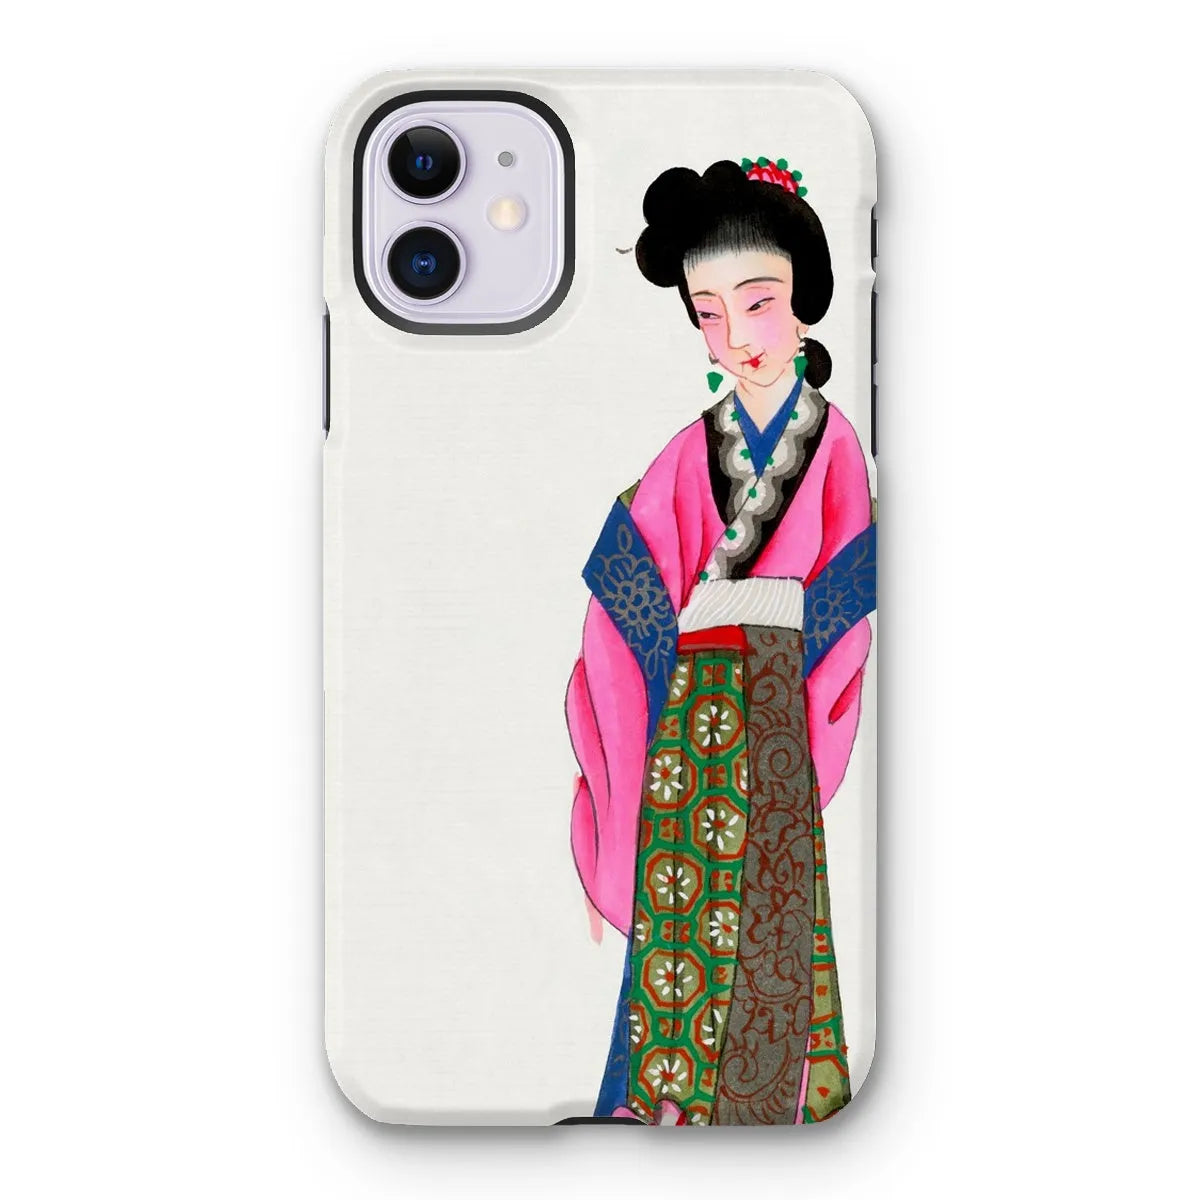 Noblewoman - Chinese Aesthetic Manchu Art Phone Case - Iphone 11 / Matte - Mobile Phone Cases - Aesthetic Art